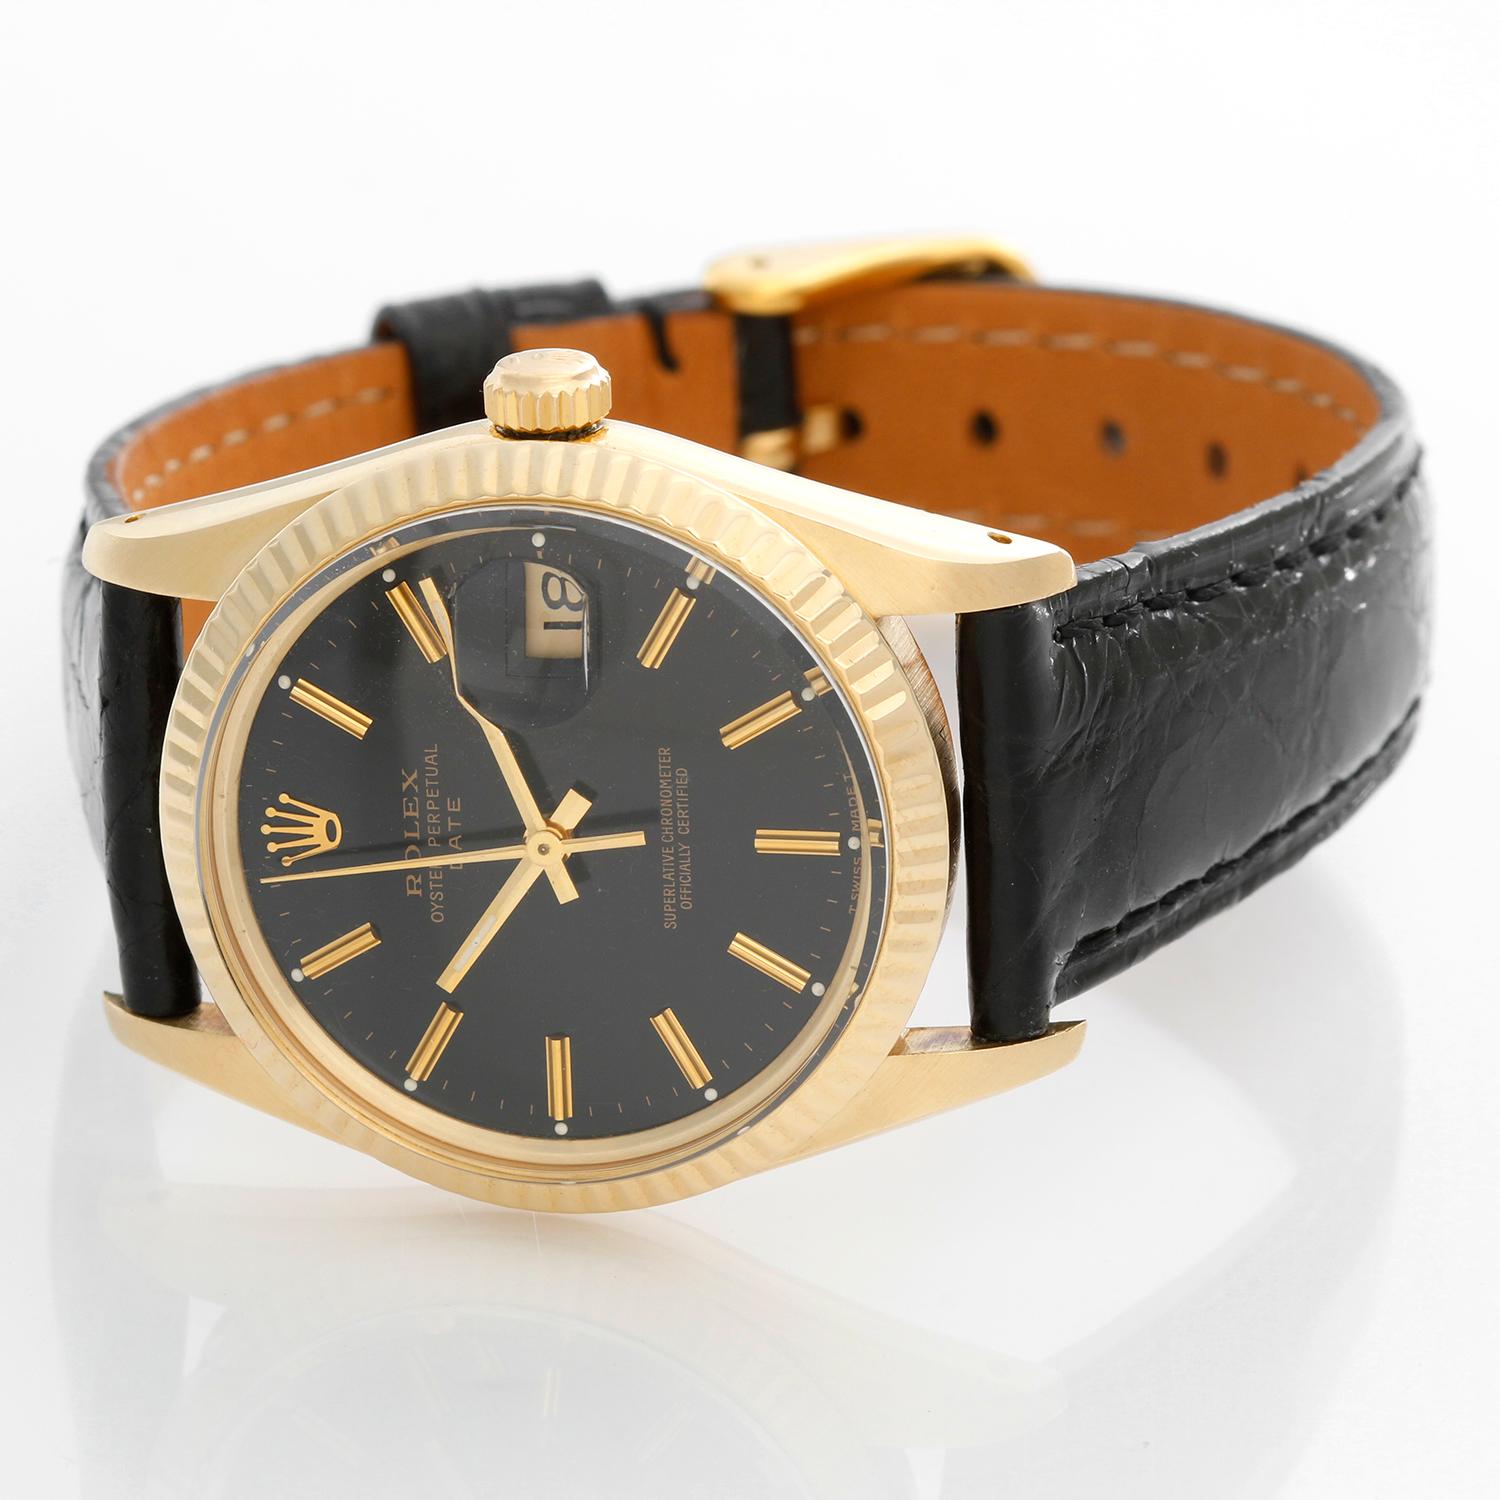 Rolex Date Men's 14k Yellow Gold Watch 15037 - Automatic winding. 14k yellow gold (34mm diameter). Black dial with yellow gold stick hour markers. Black leather strap with tang buckle. Pre-owned with Rolex box .
